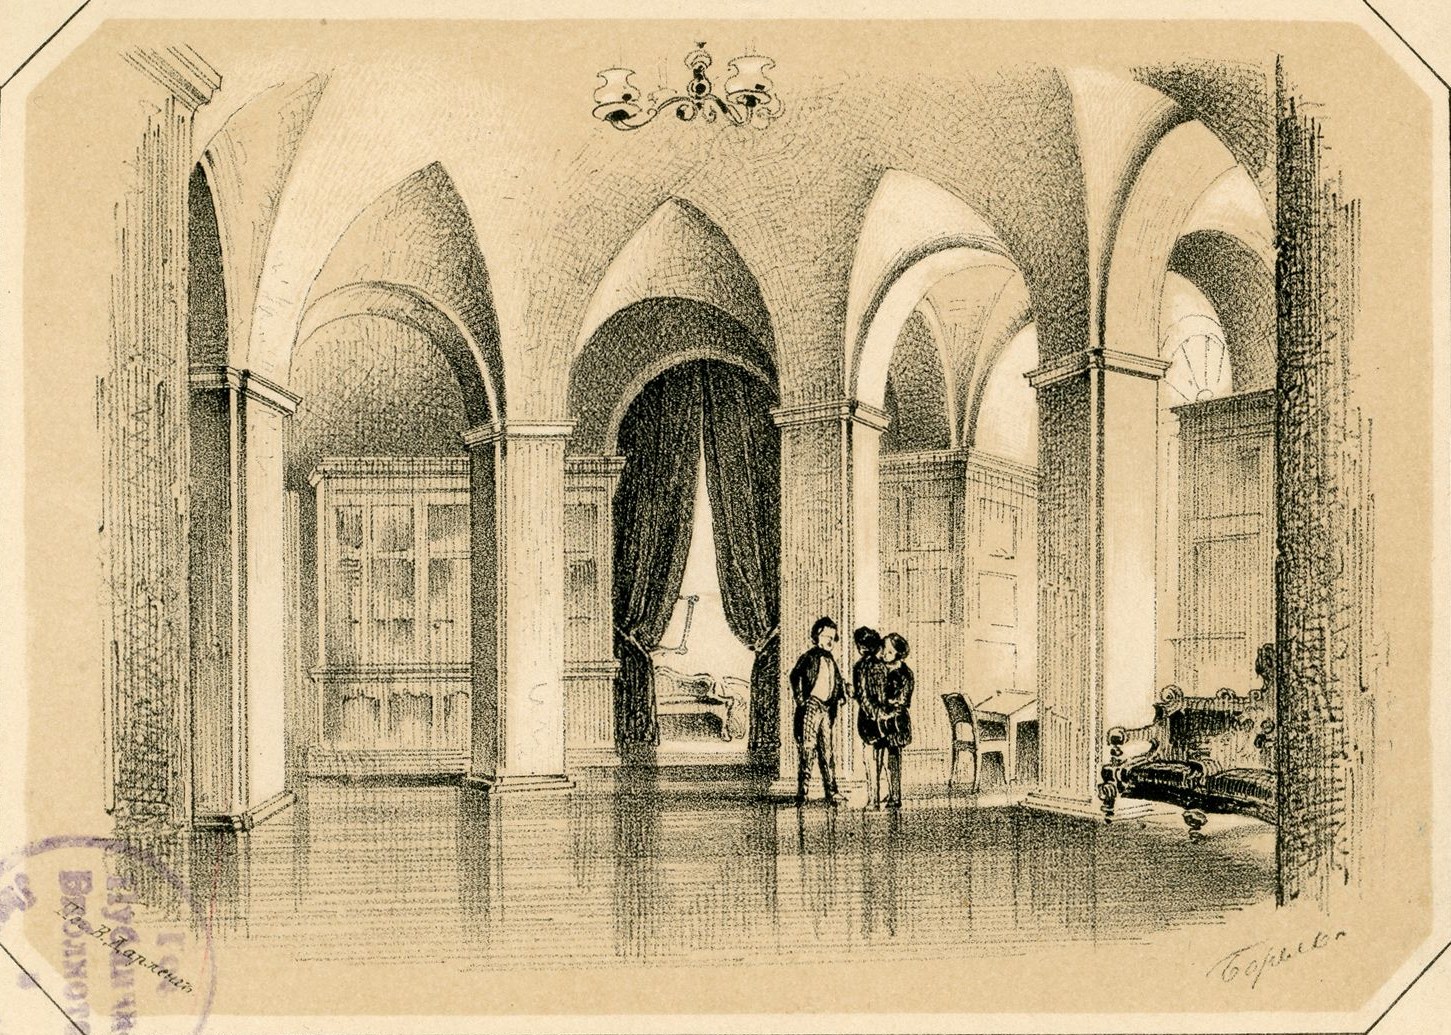 Reception Hall at the Imperial Public Library. Drawing by P. Borel. 1852